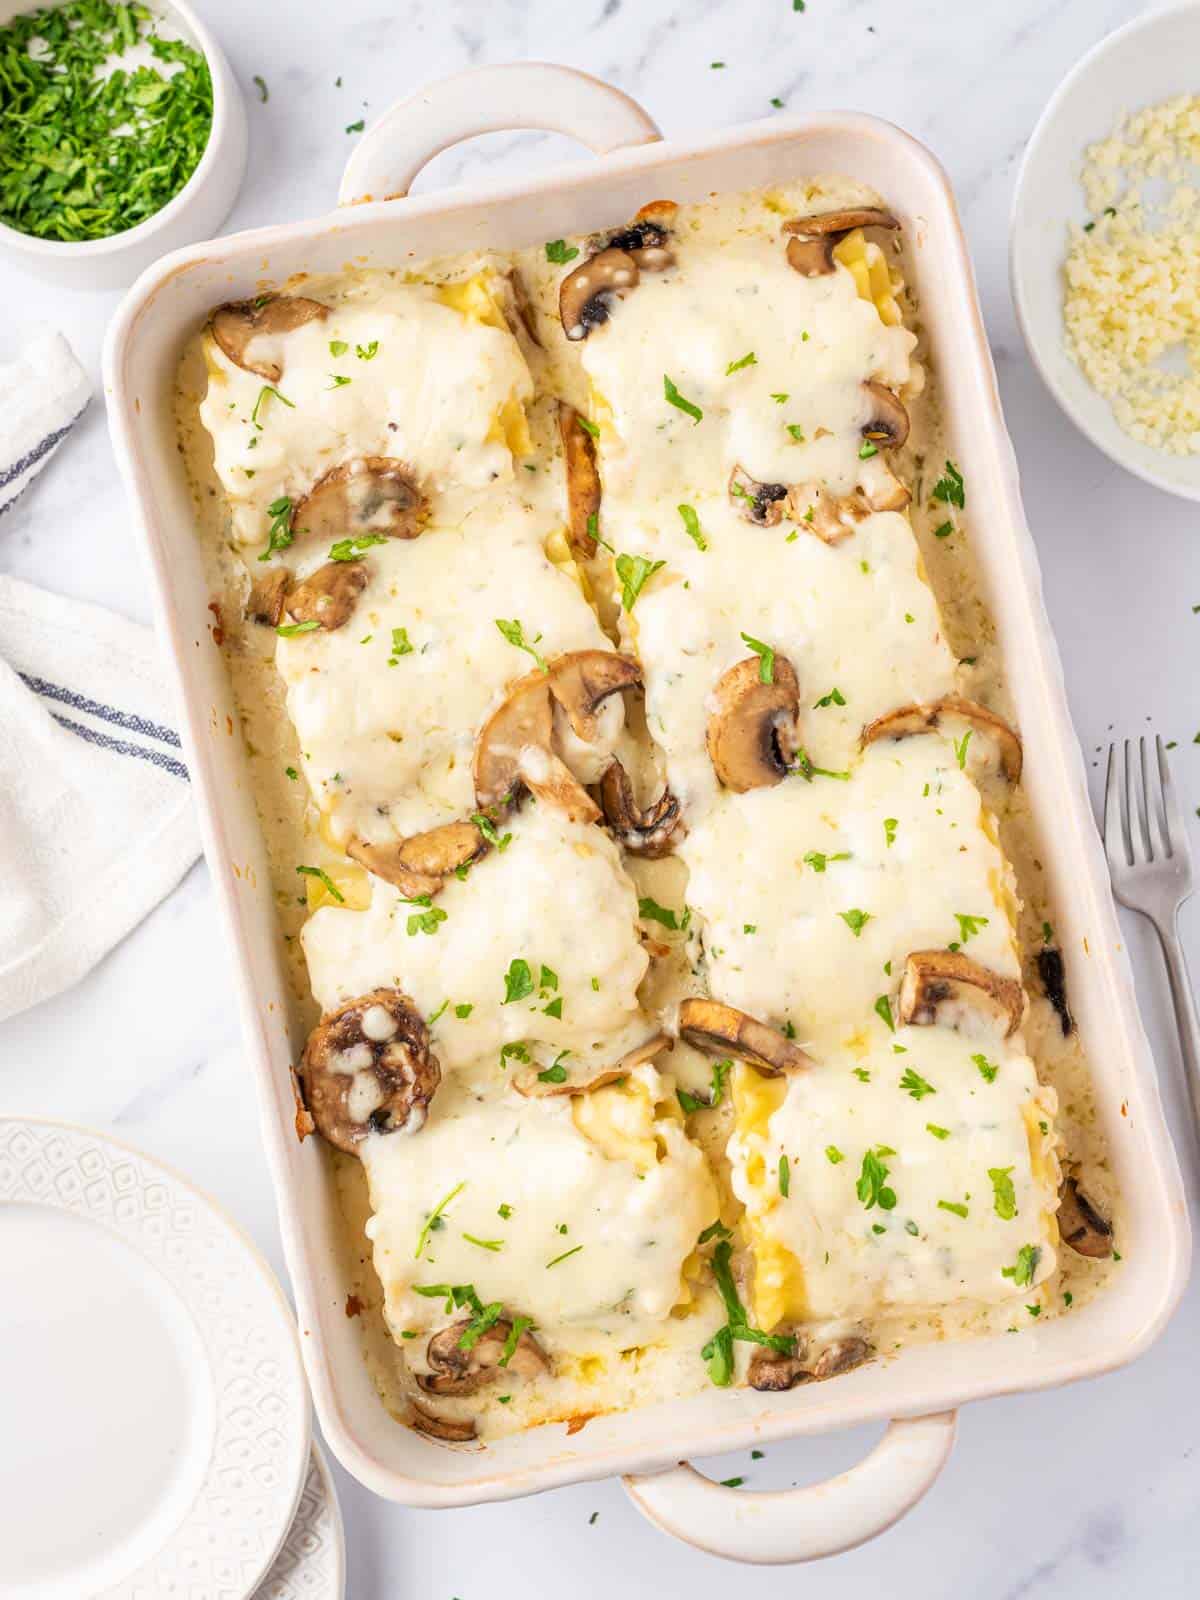 8 chicken alfredo lasagna rolls in a casserole dish with melted cheese on top.